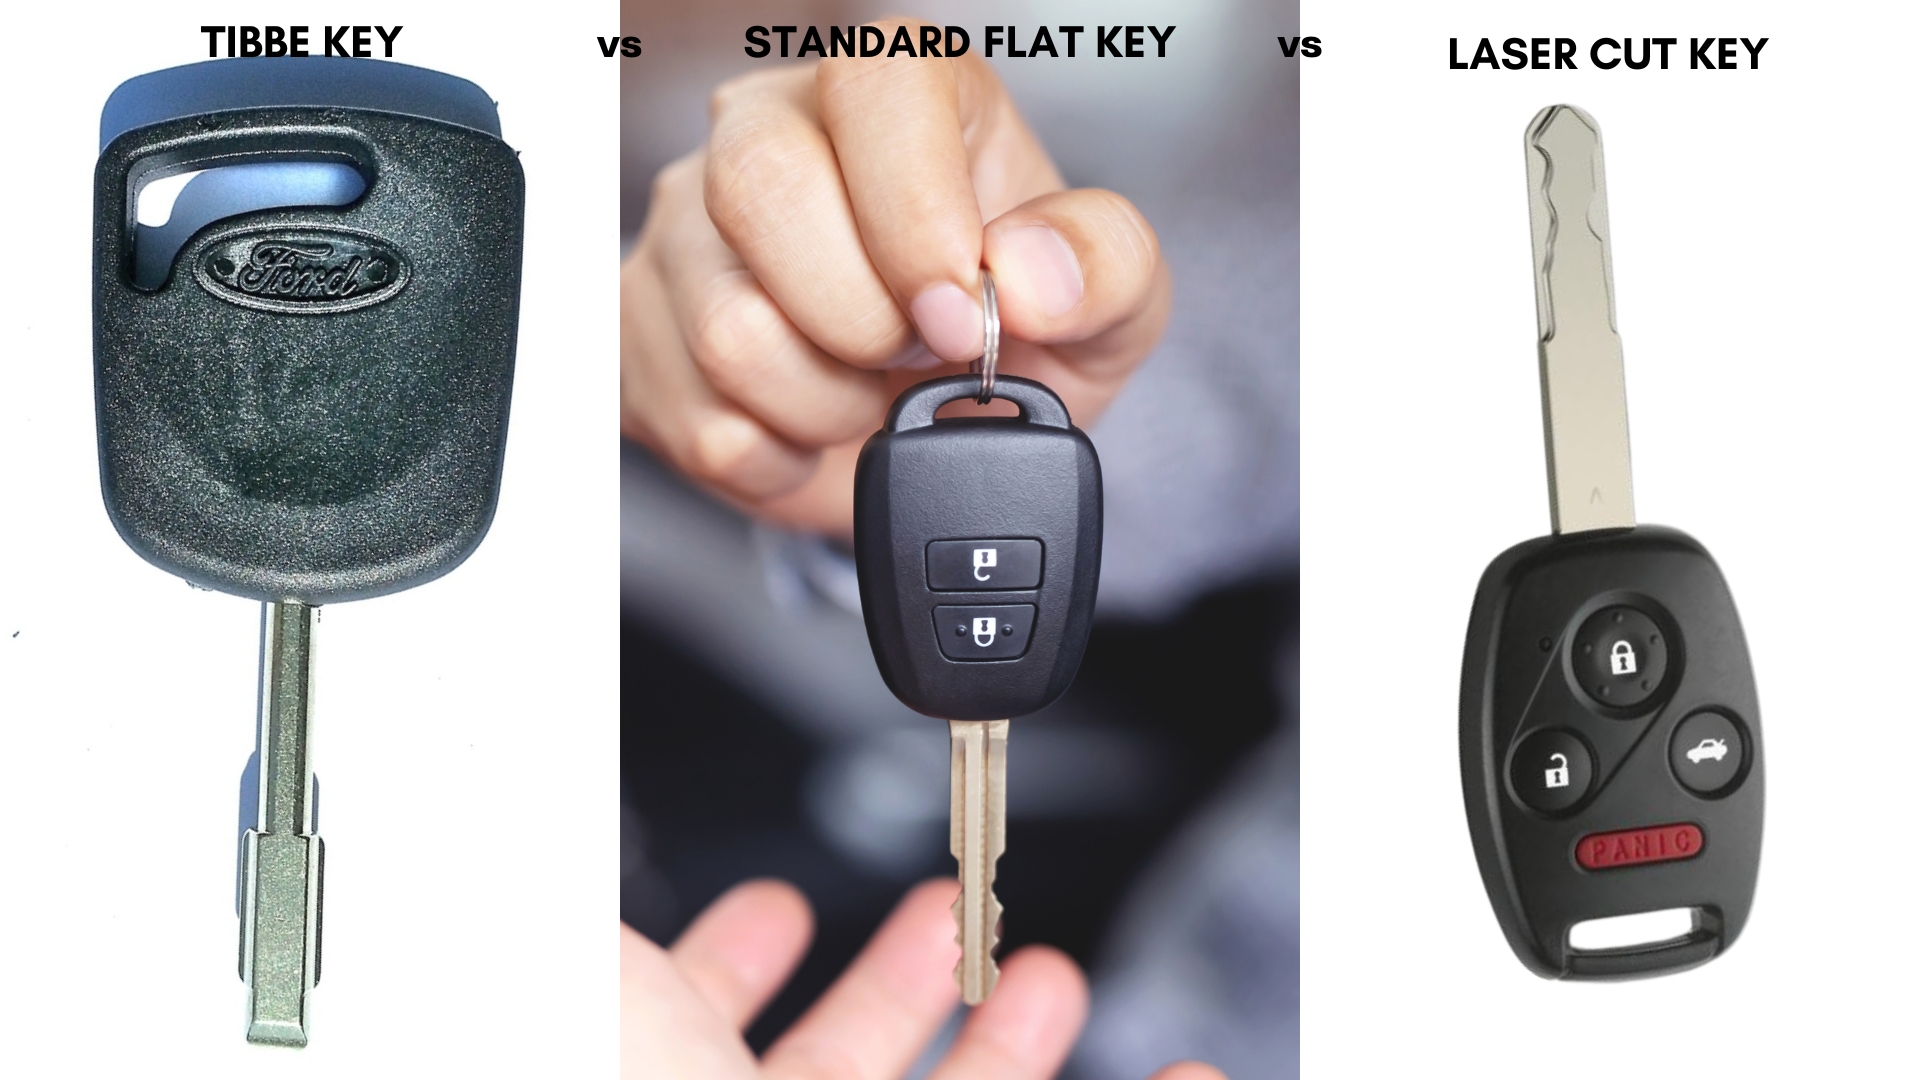 The difference between Tibbe key from other car keys